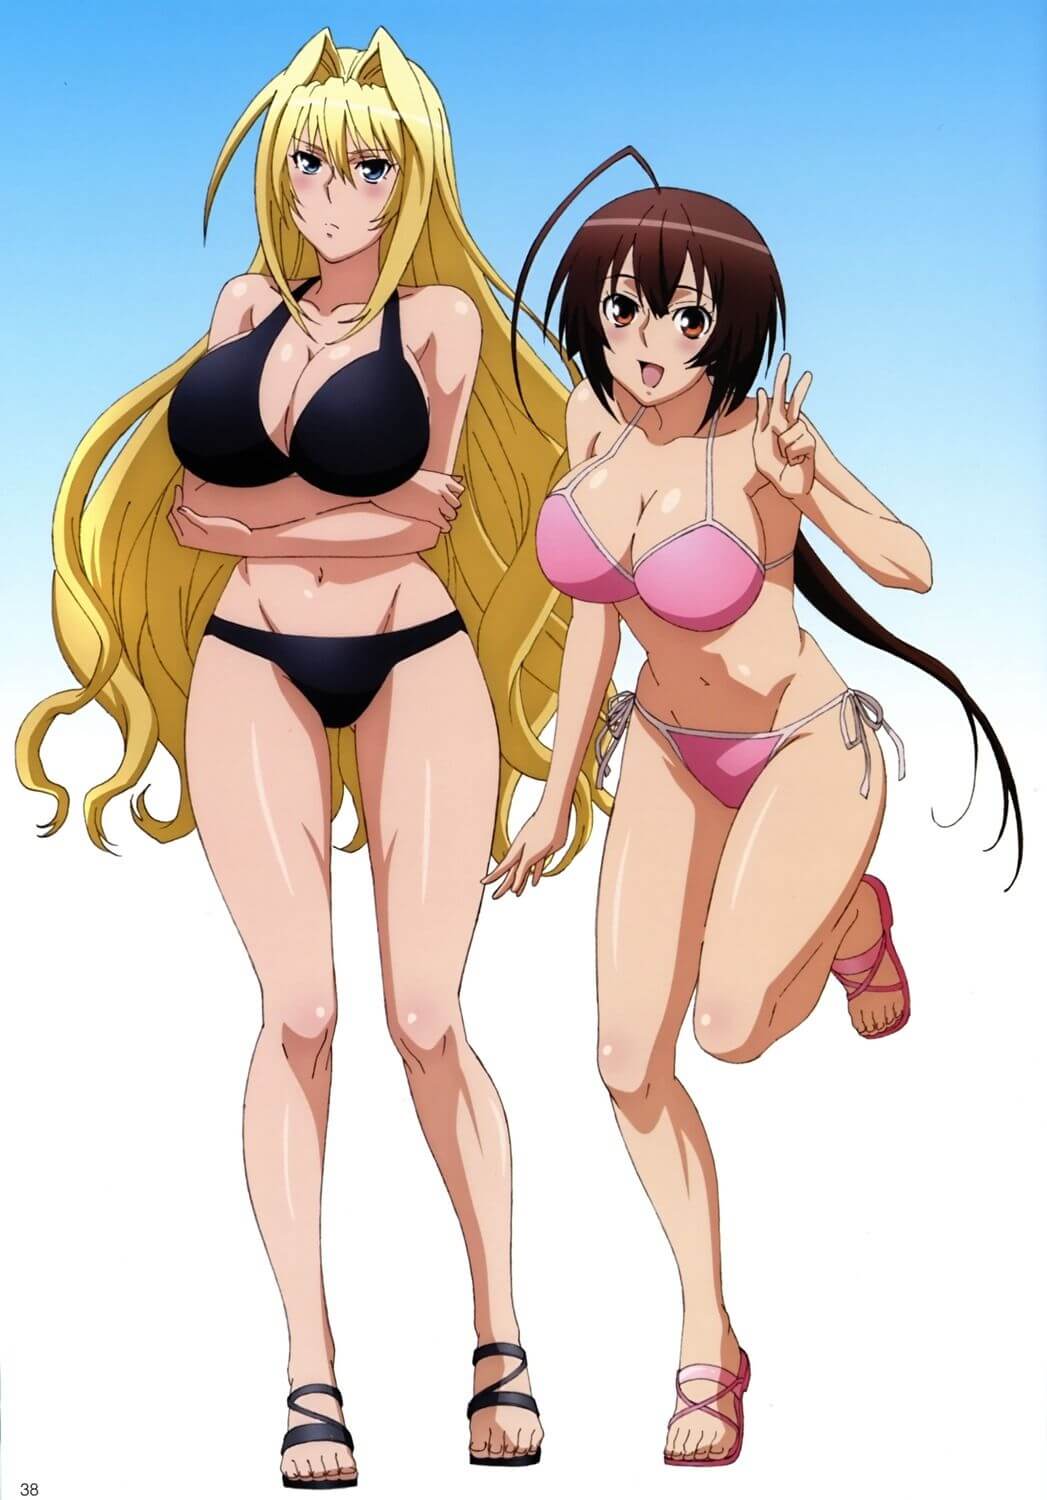 30 Hot Pictures Of Tsukiumi From The Anime Sekirei Which Will Make You Fall For Her | Best Of Comic Books